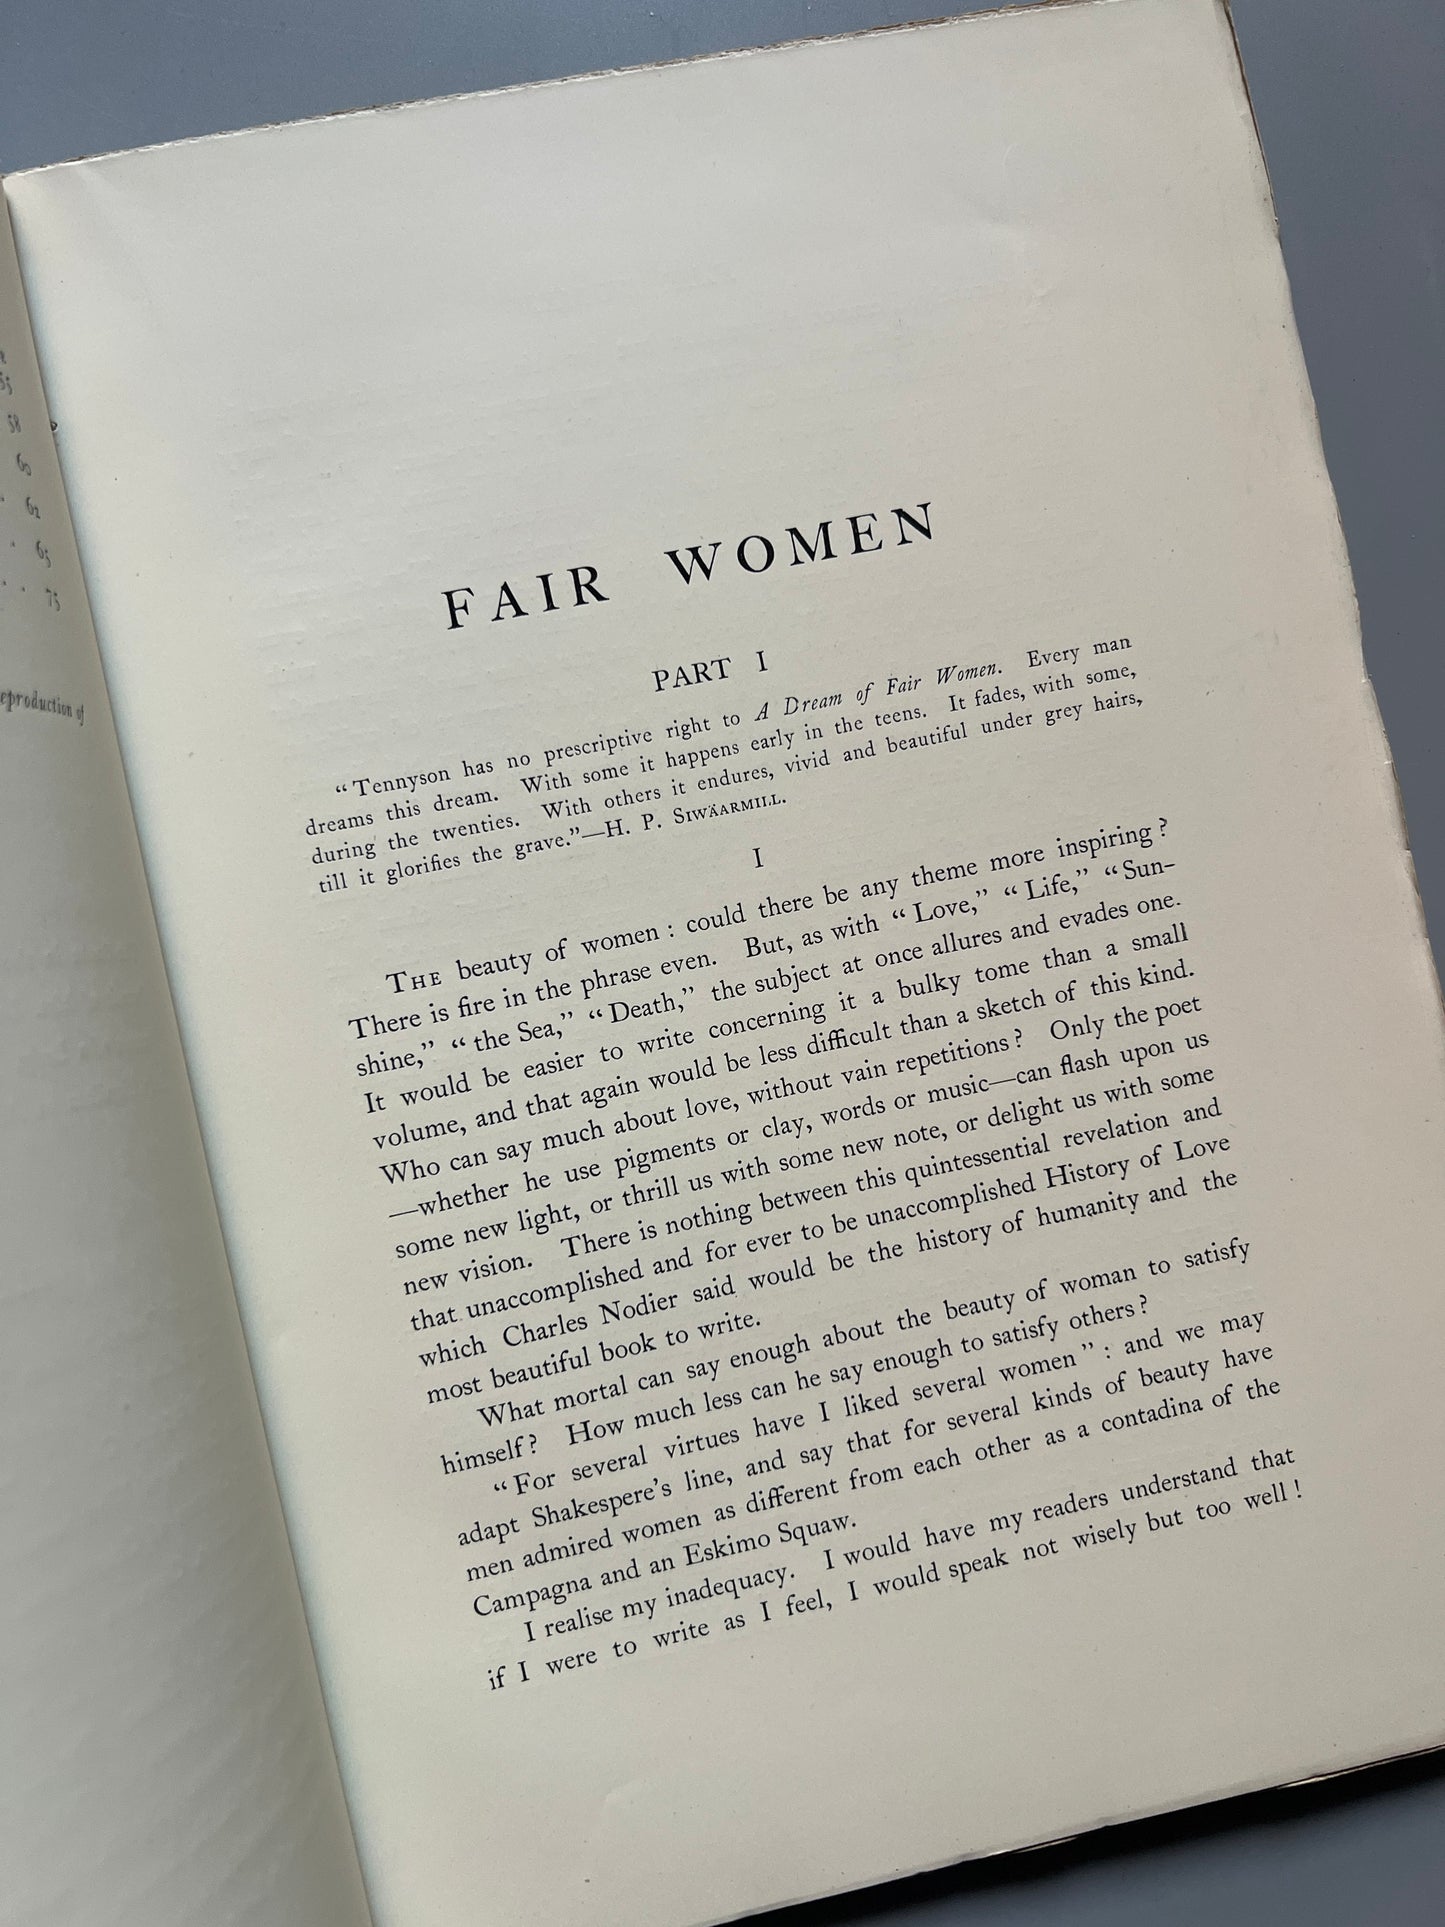 Fair women in painting and poetry, William Sharp. The portfolio - Seeley and Co, 1894